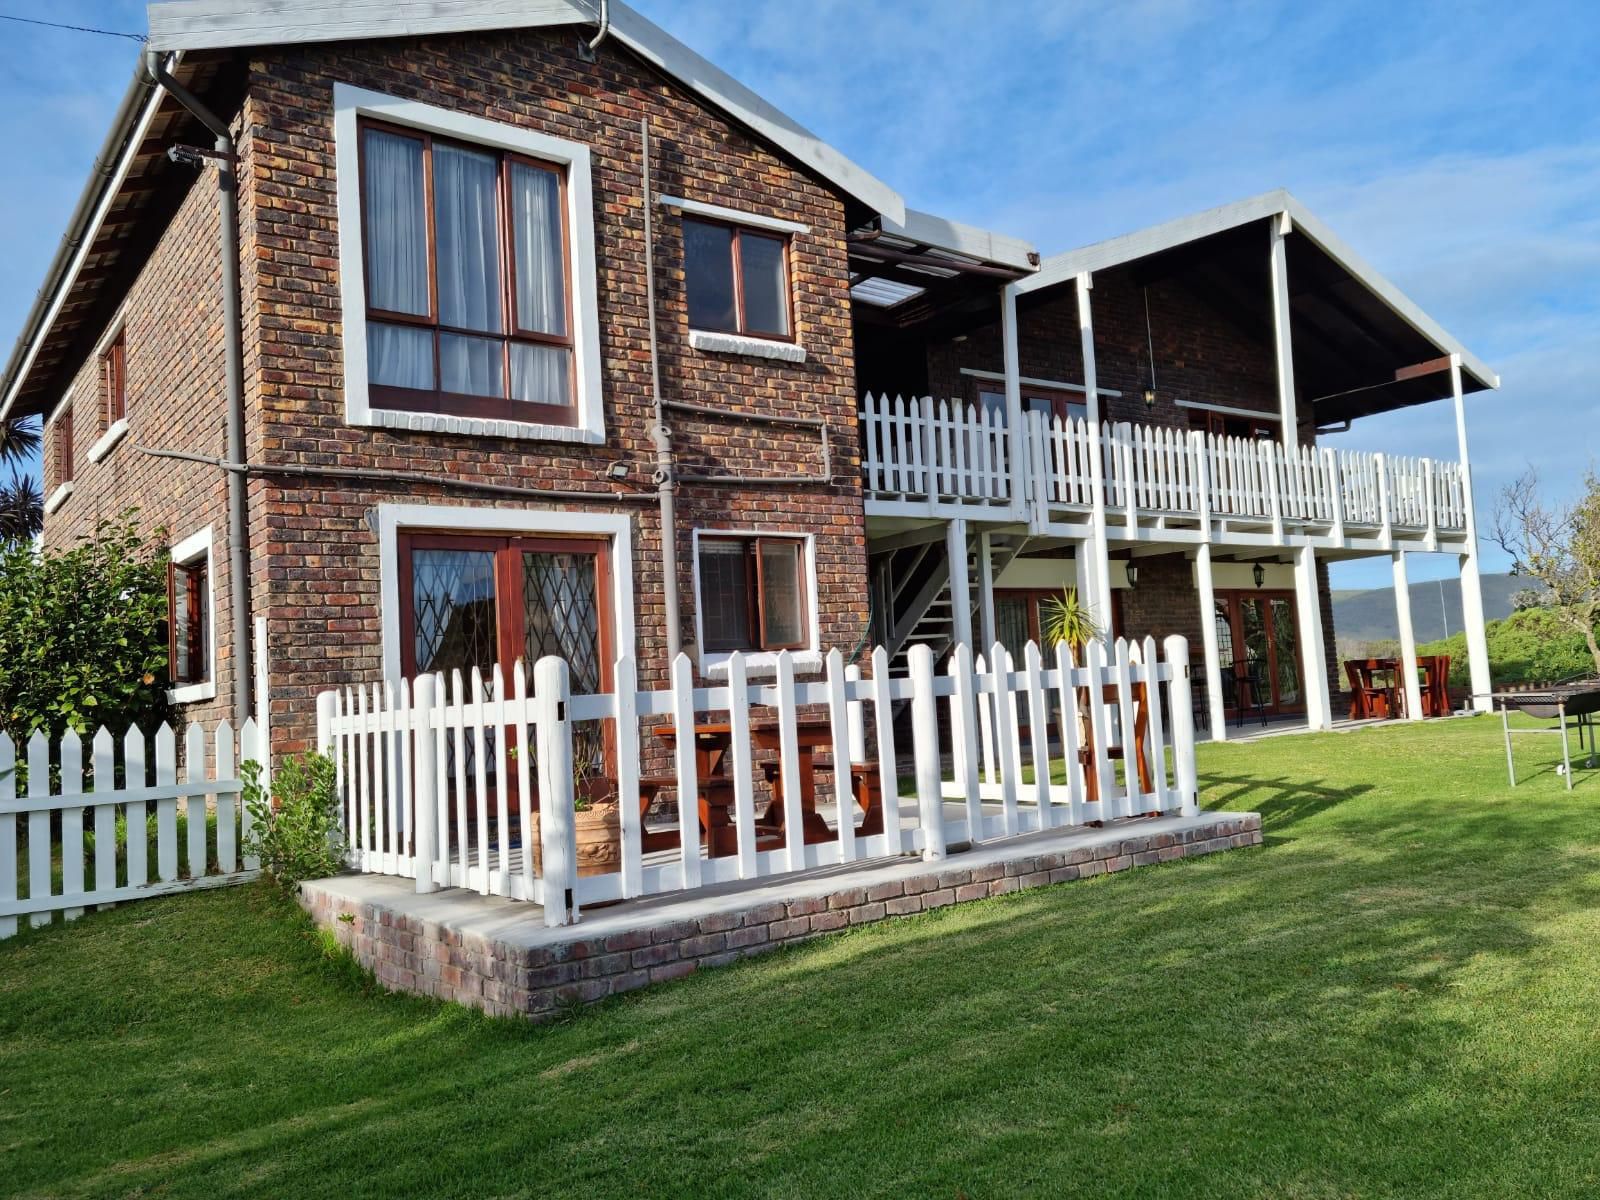 Salt River Lodge Knysna Heights Knysna Western Cape South Africa Building, Architecture, Half Timbered House, House